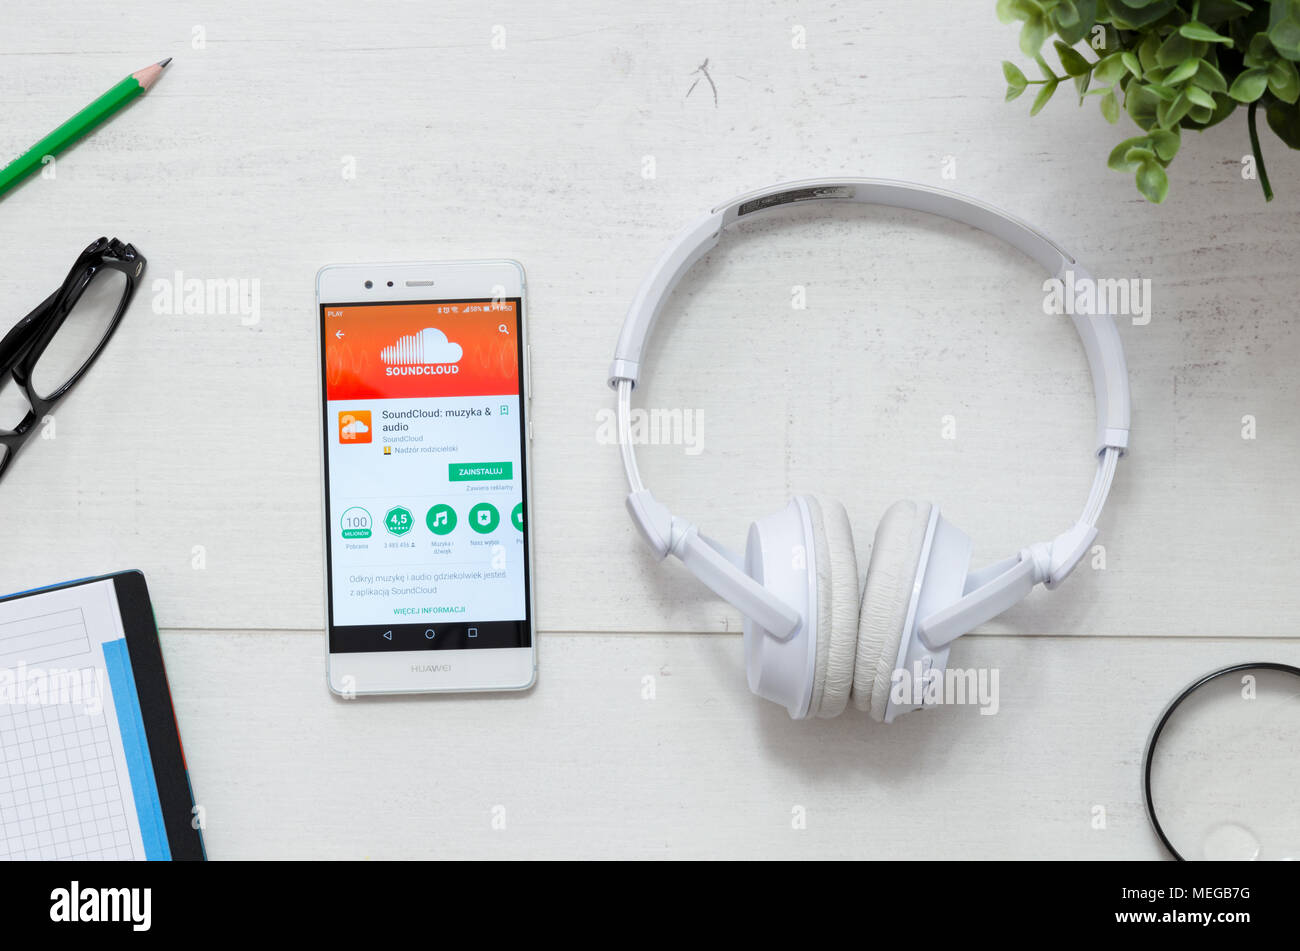 WROCLAW, POLAND - MARCH 29, 2018: Soundcloud is a service that offers legal streaming music. Smartphone with Soundcloud app in Google Play store on de Stock Photo